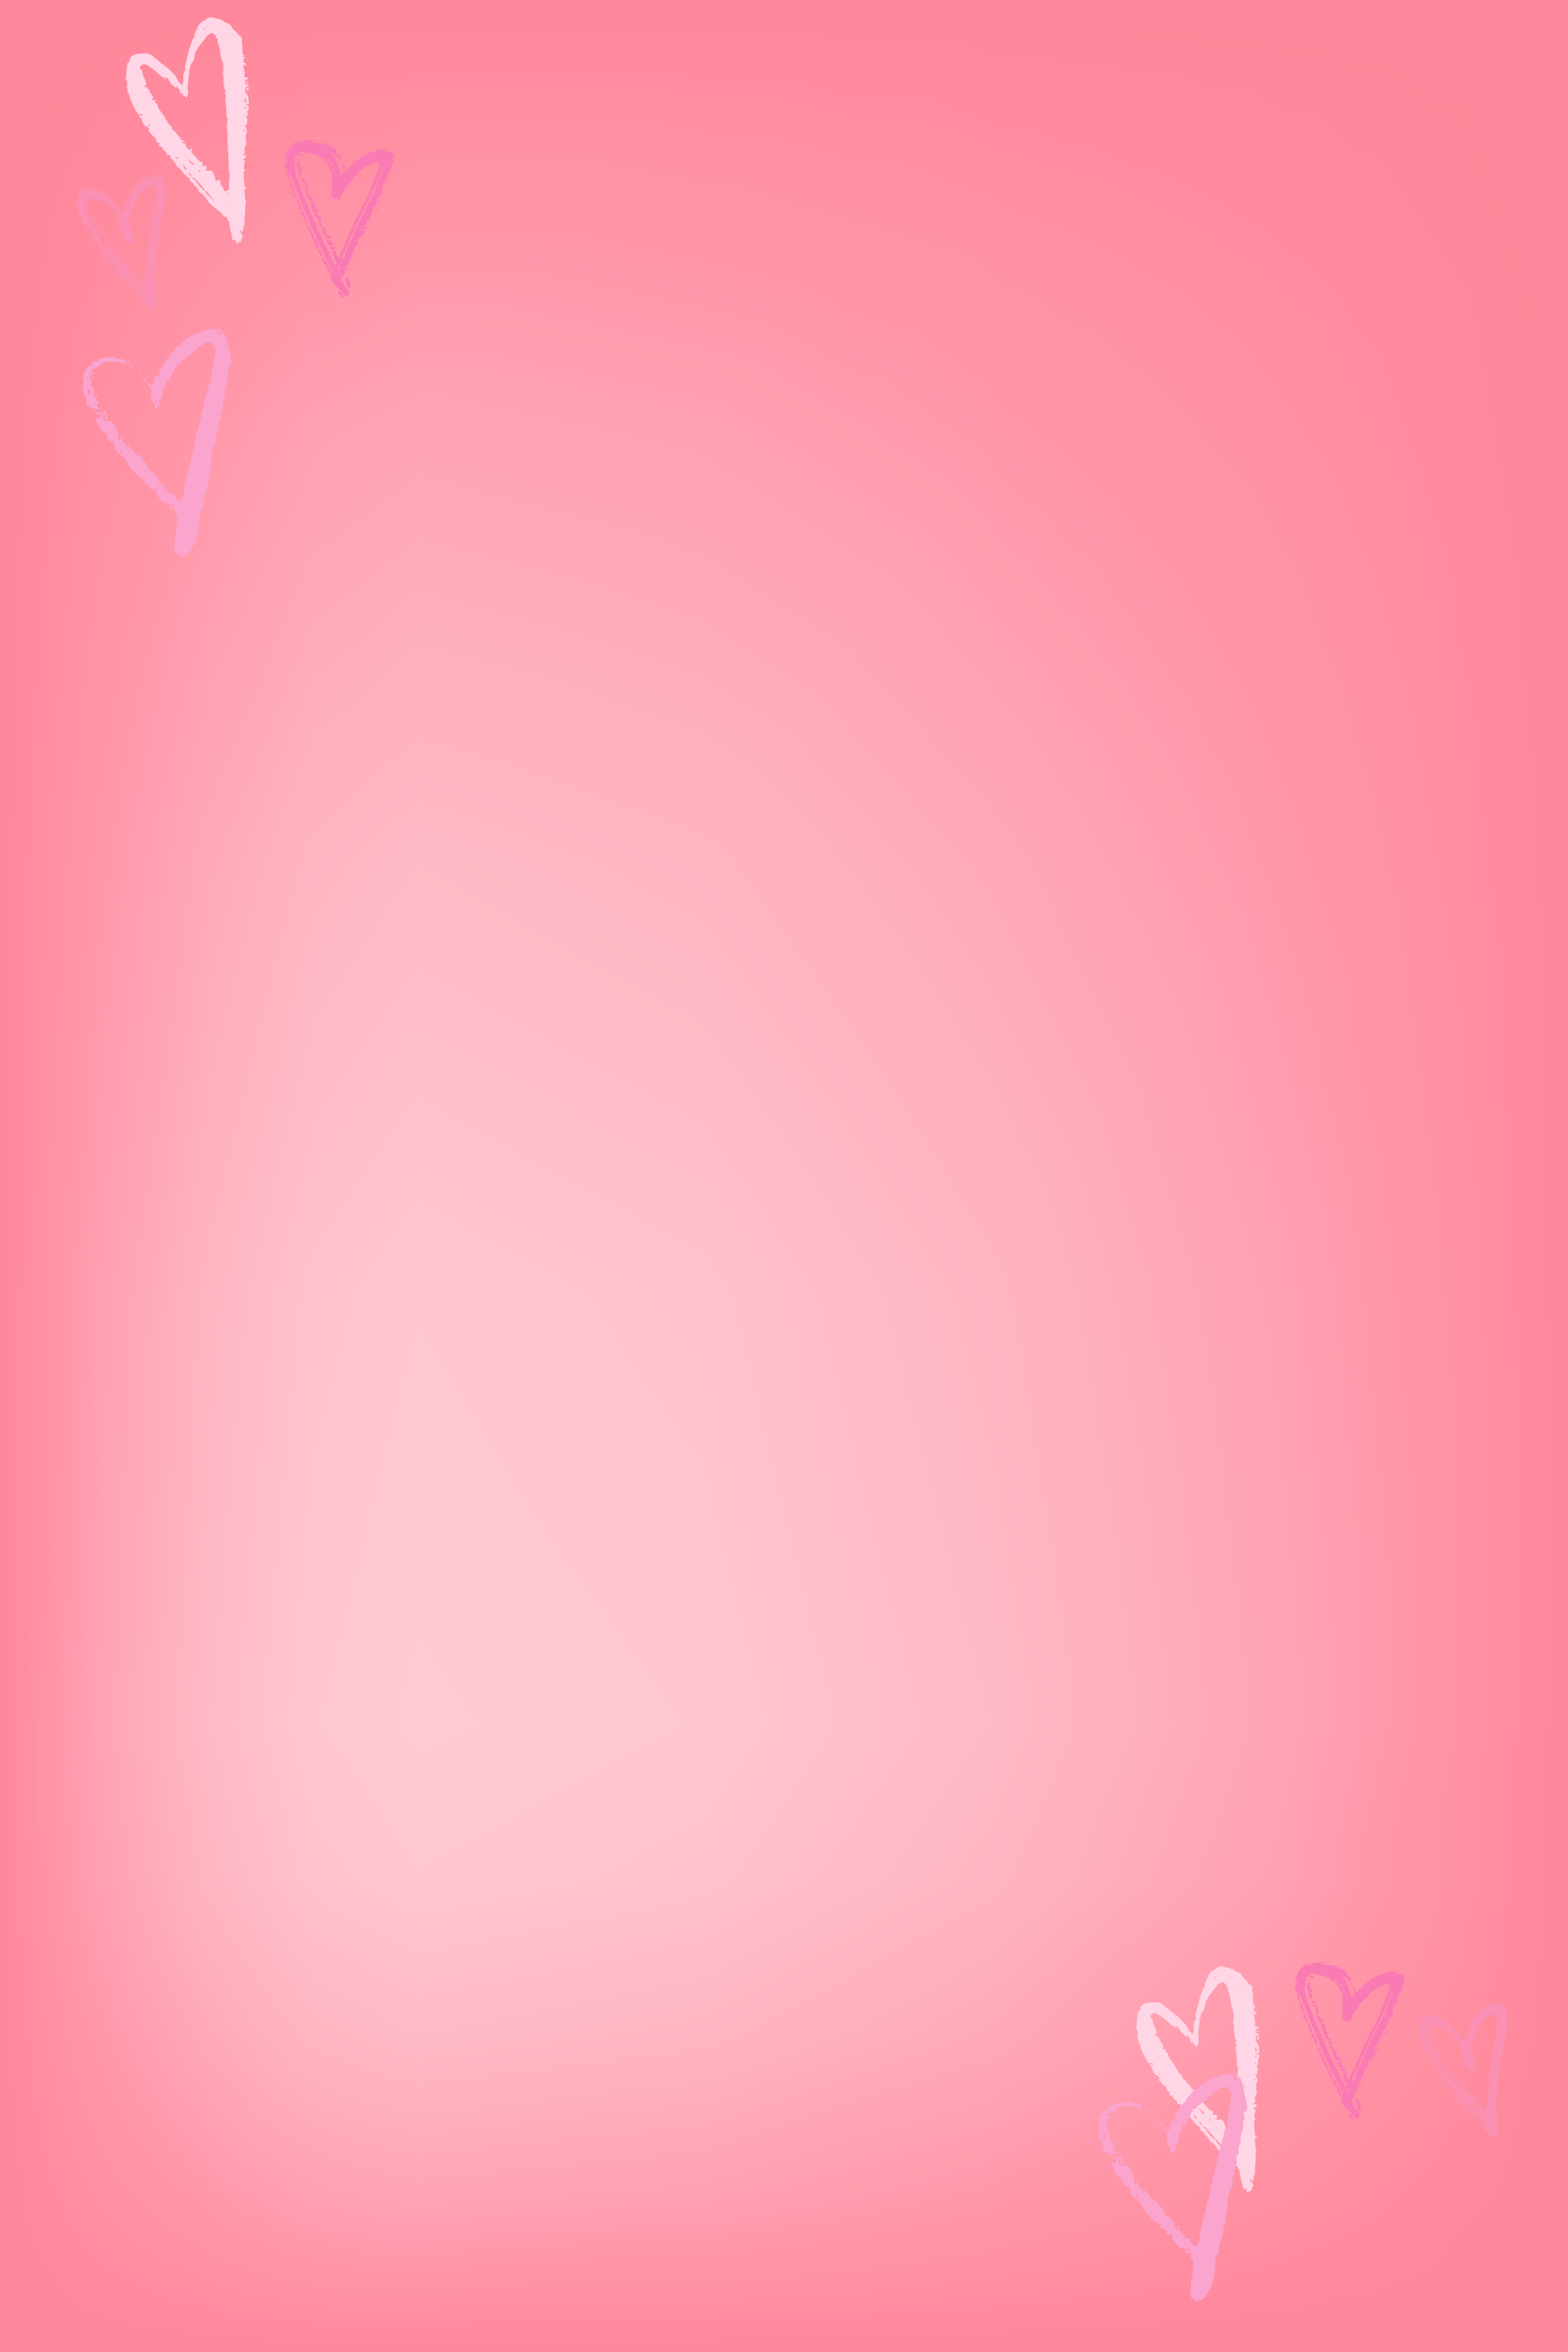 LETTER ON PINK SHADE WITH HEARTS BACKGROUND